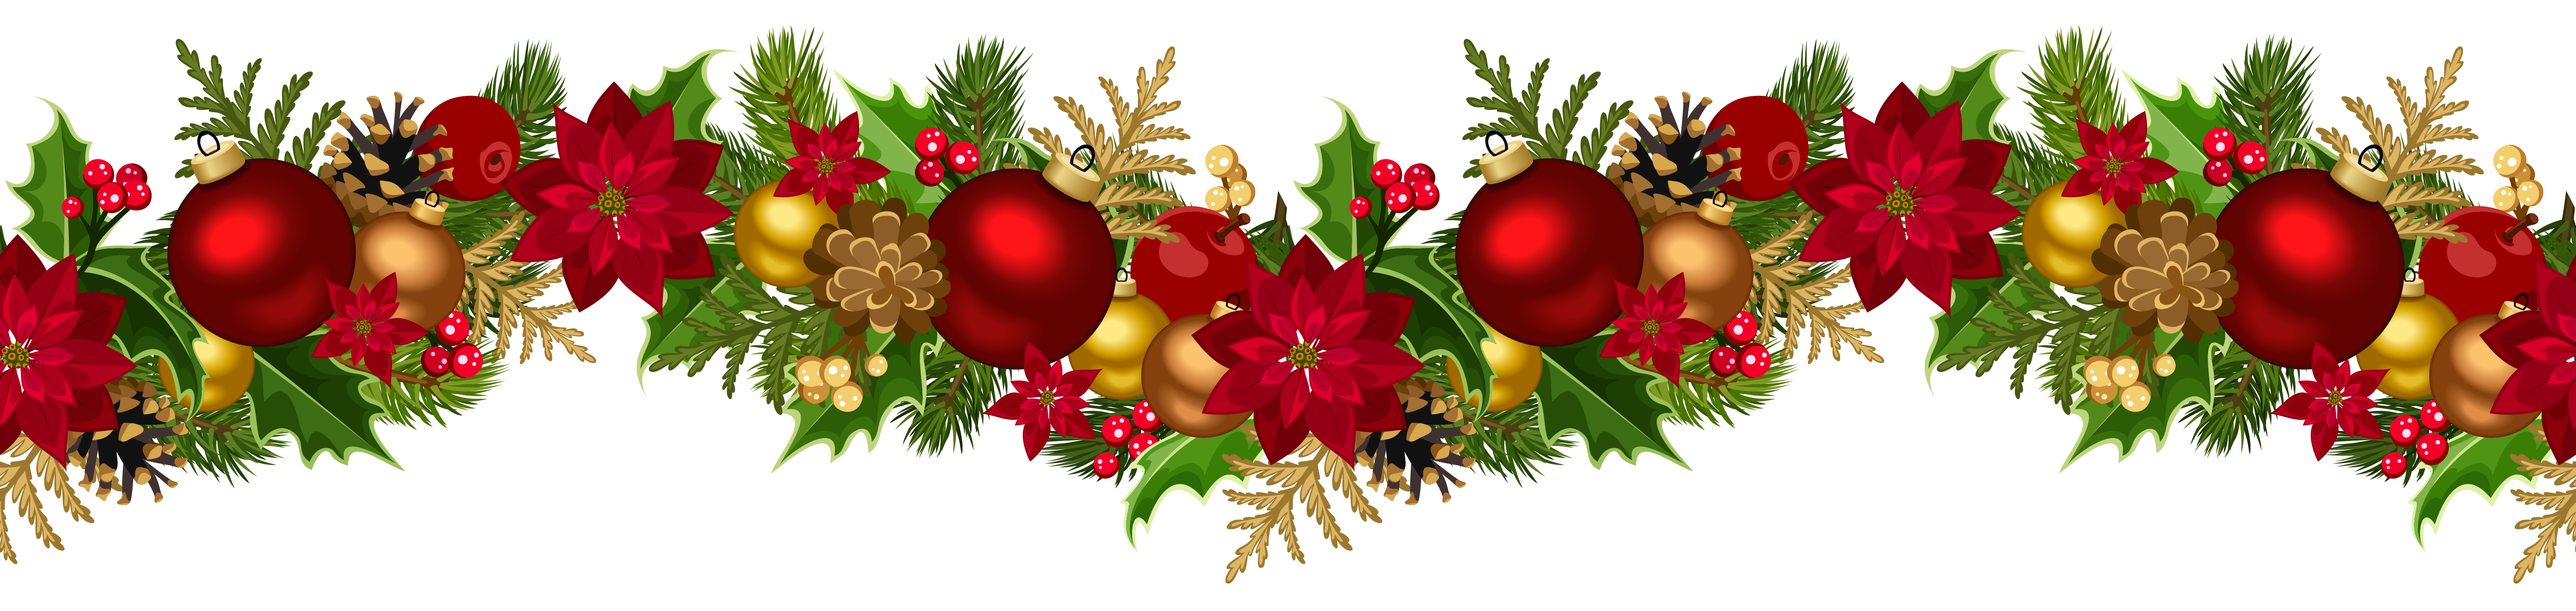 Christmas Wreath PNG Background Image